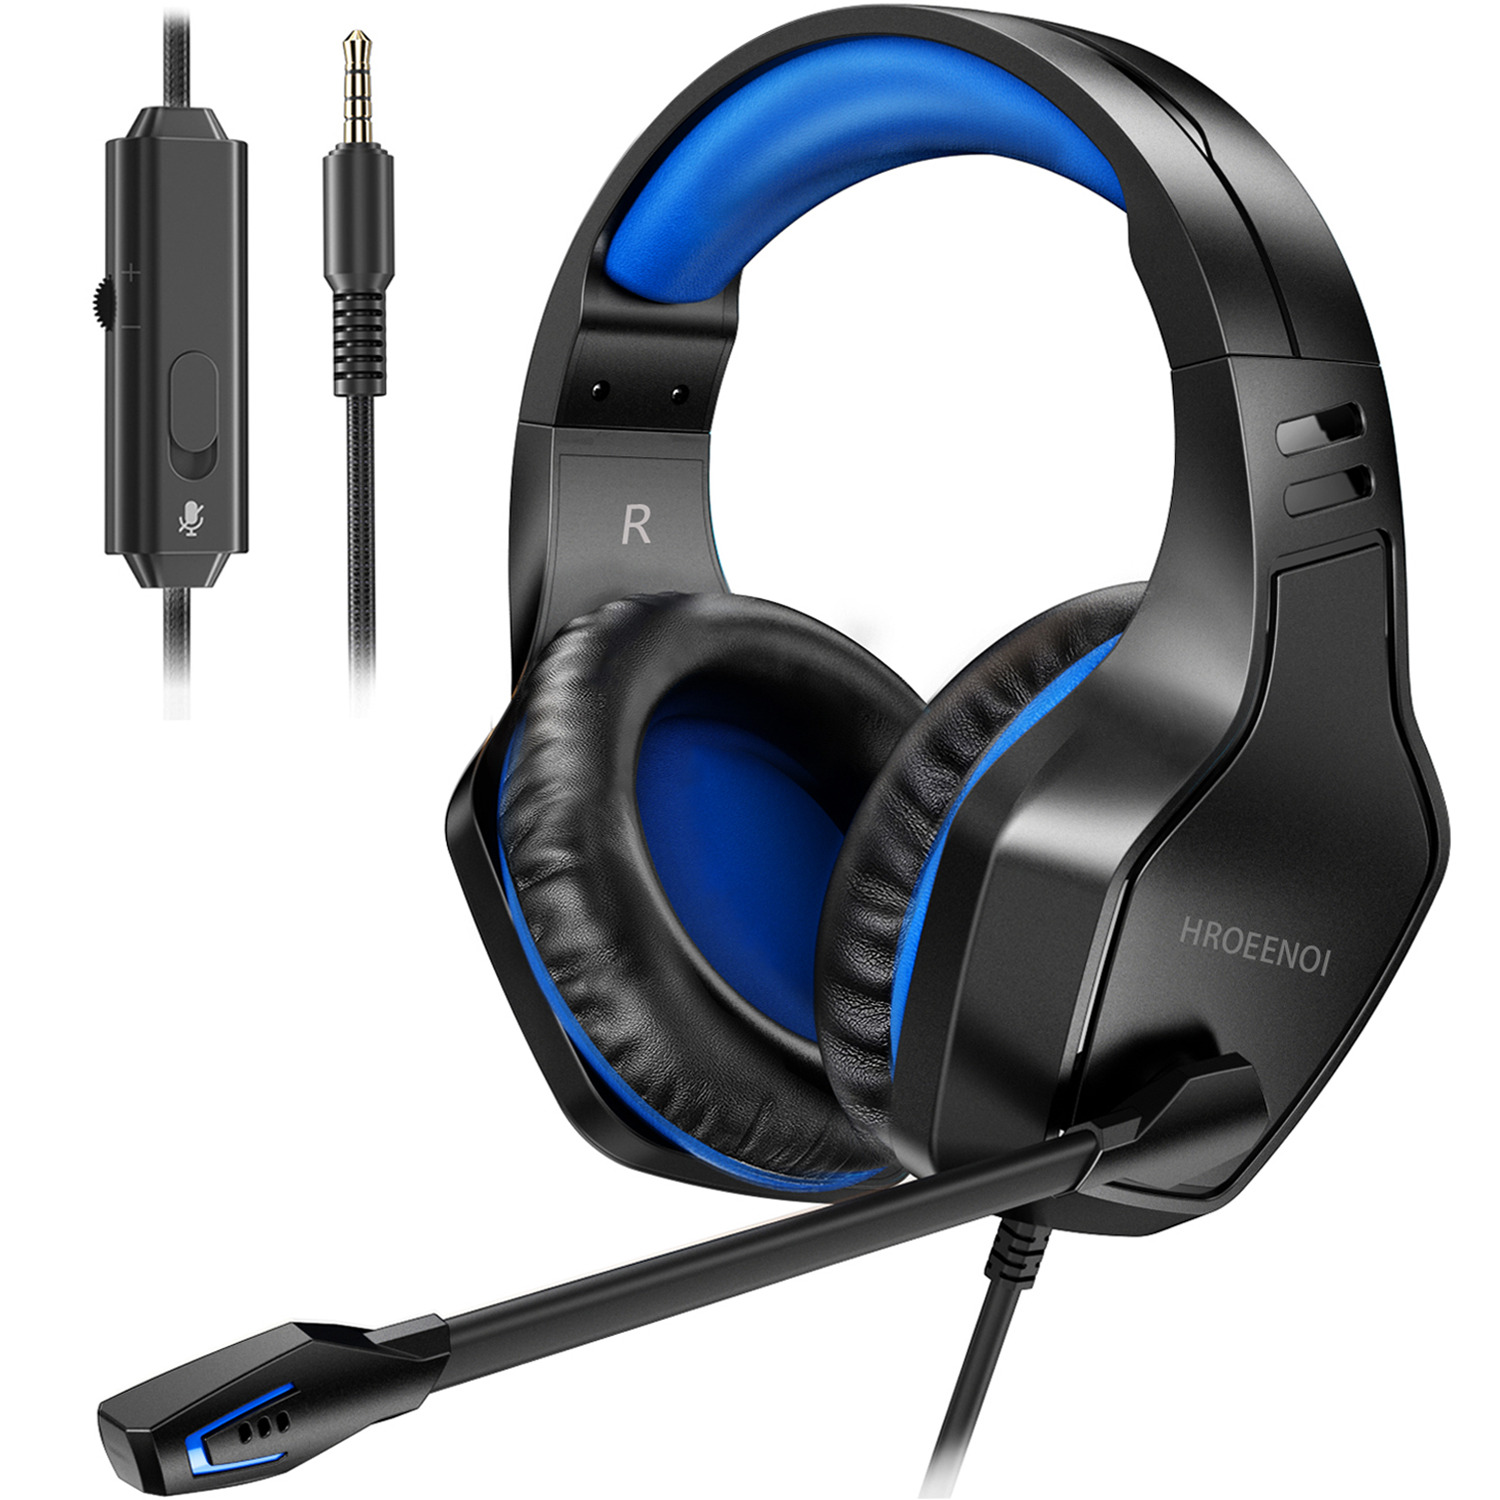 New Surround Gaming Headset with Mic for PC/PS4/Xbox